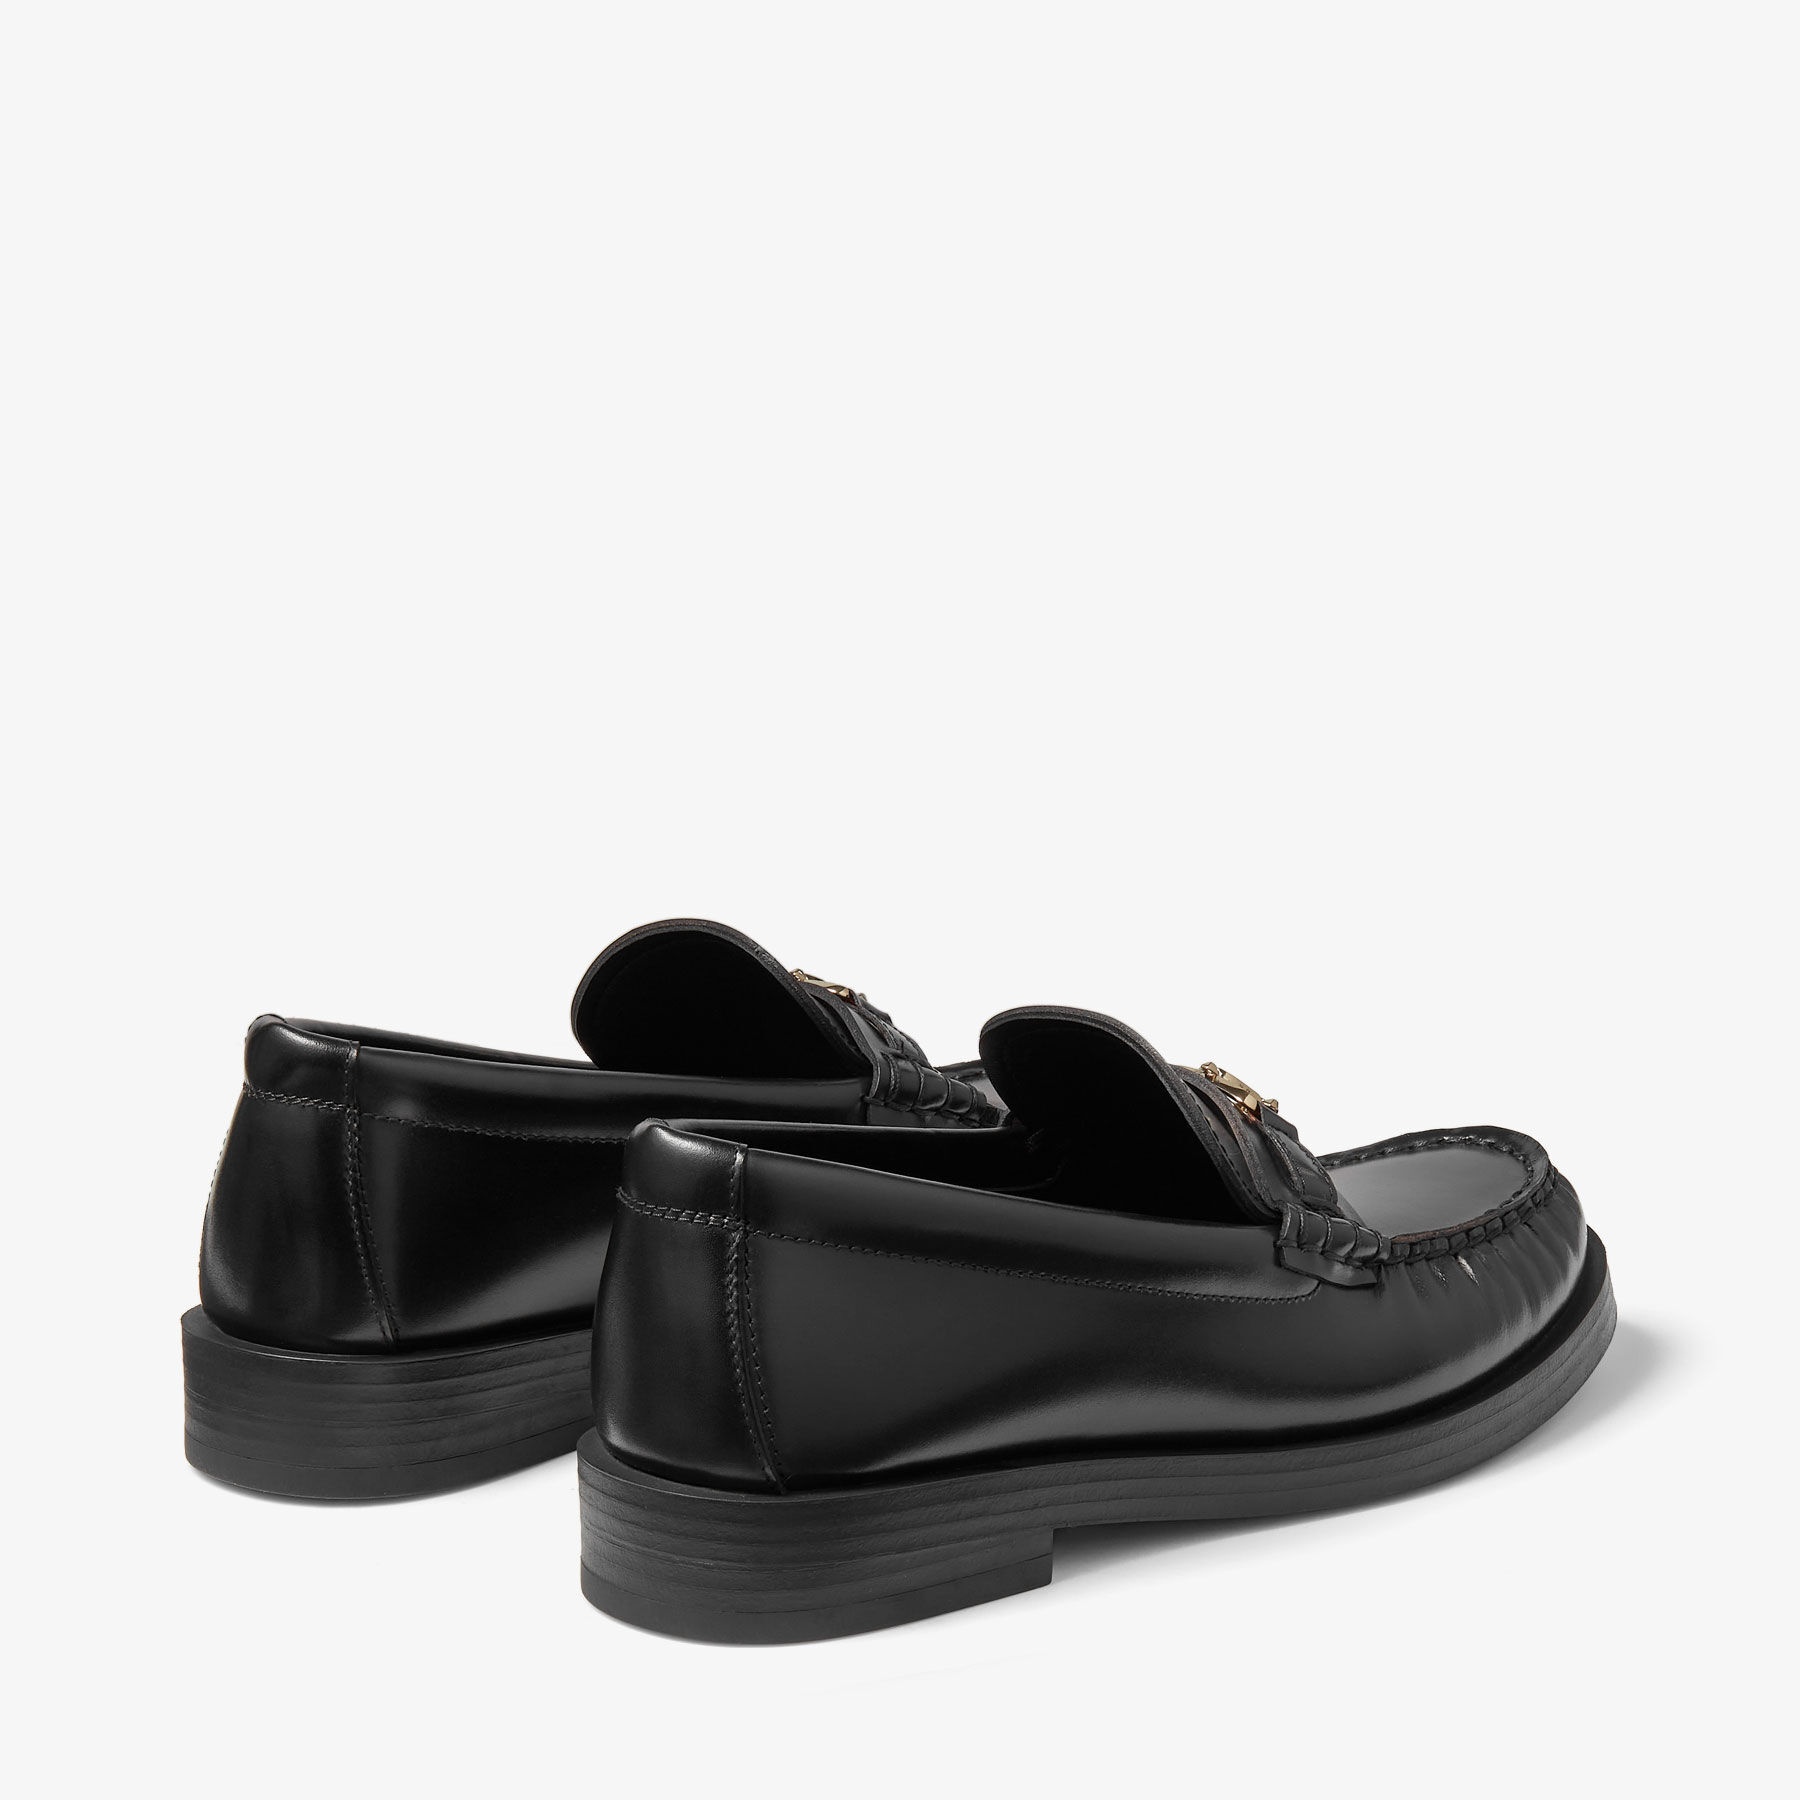 JIMMY CHOO Addie/JC
Black Box Calf Leather Flat Loafers with JC Emblem outlook